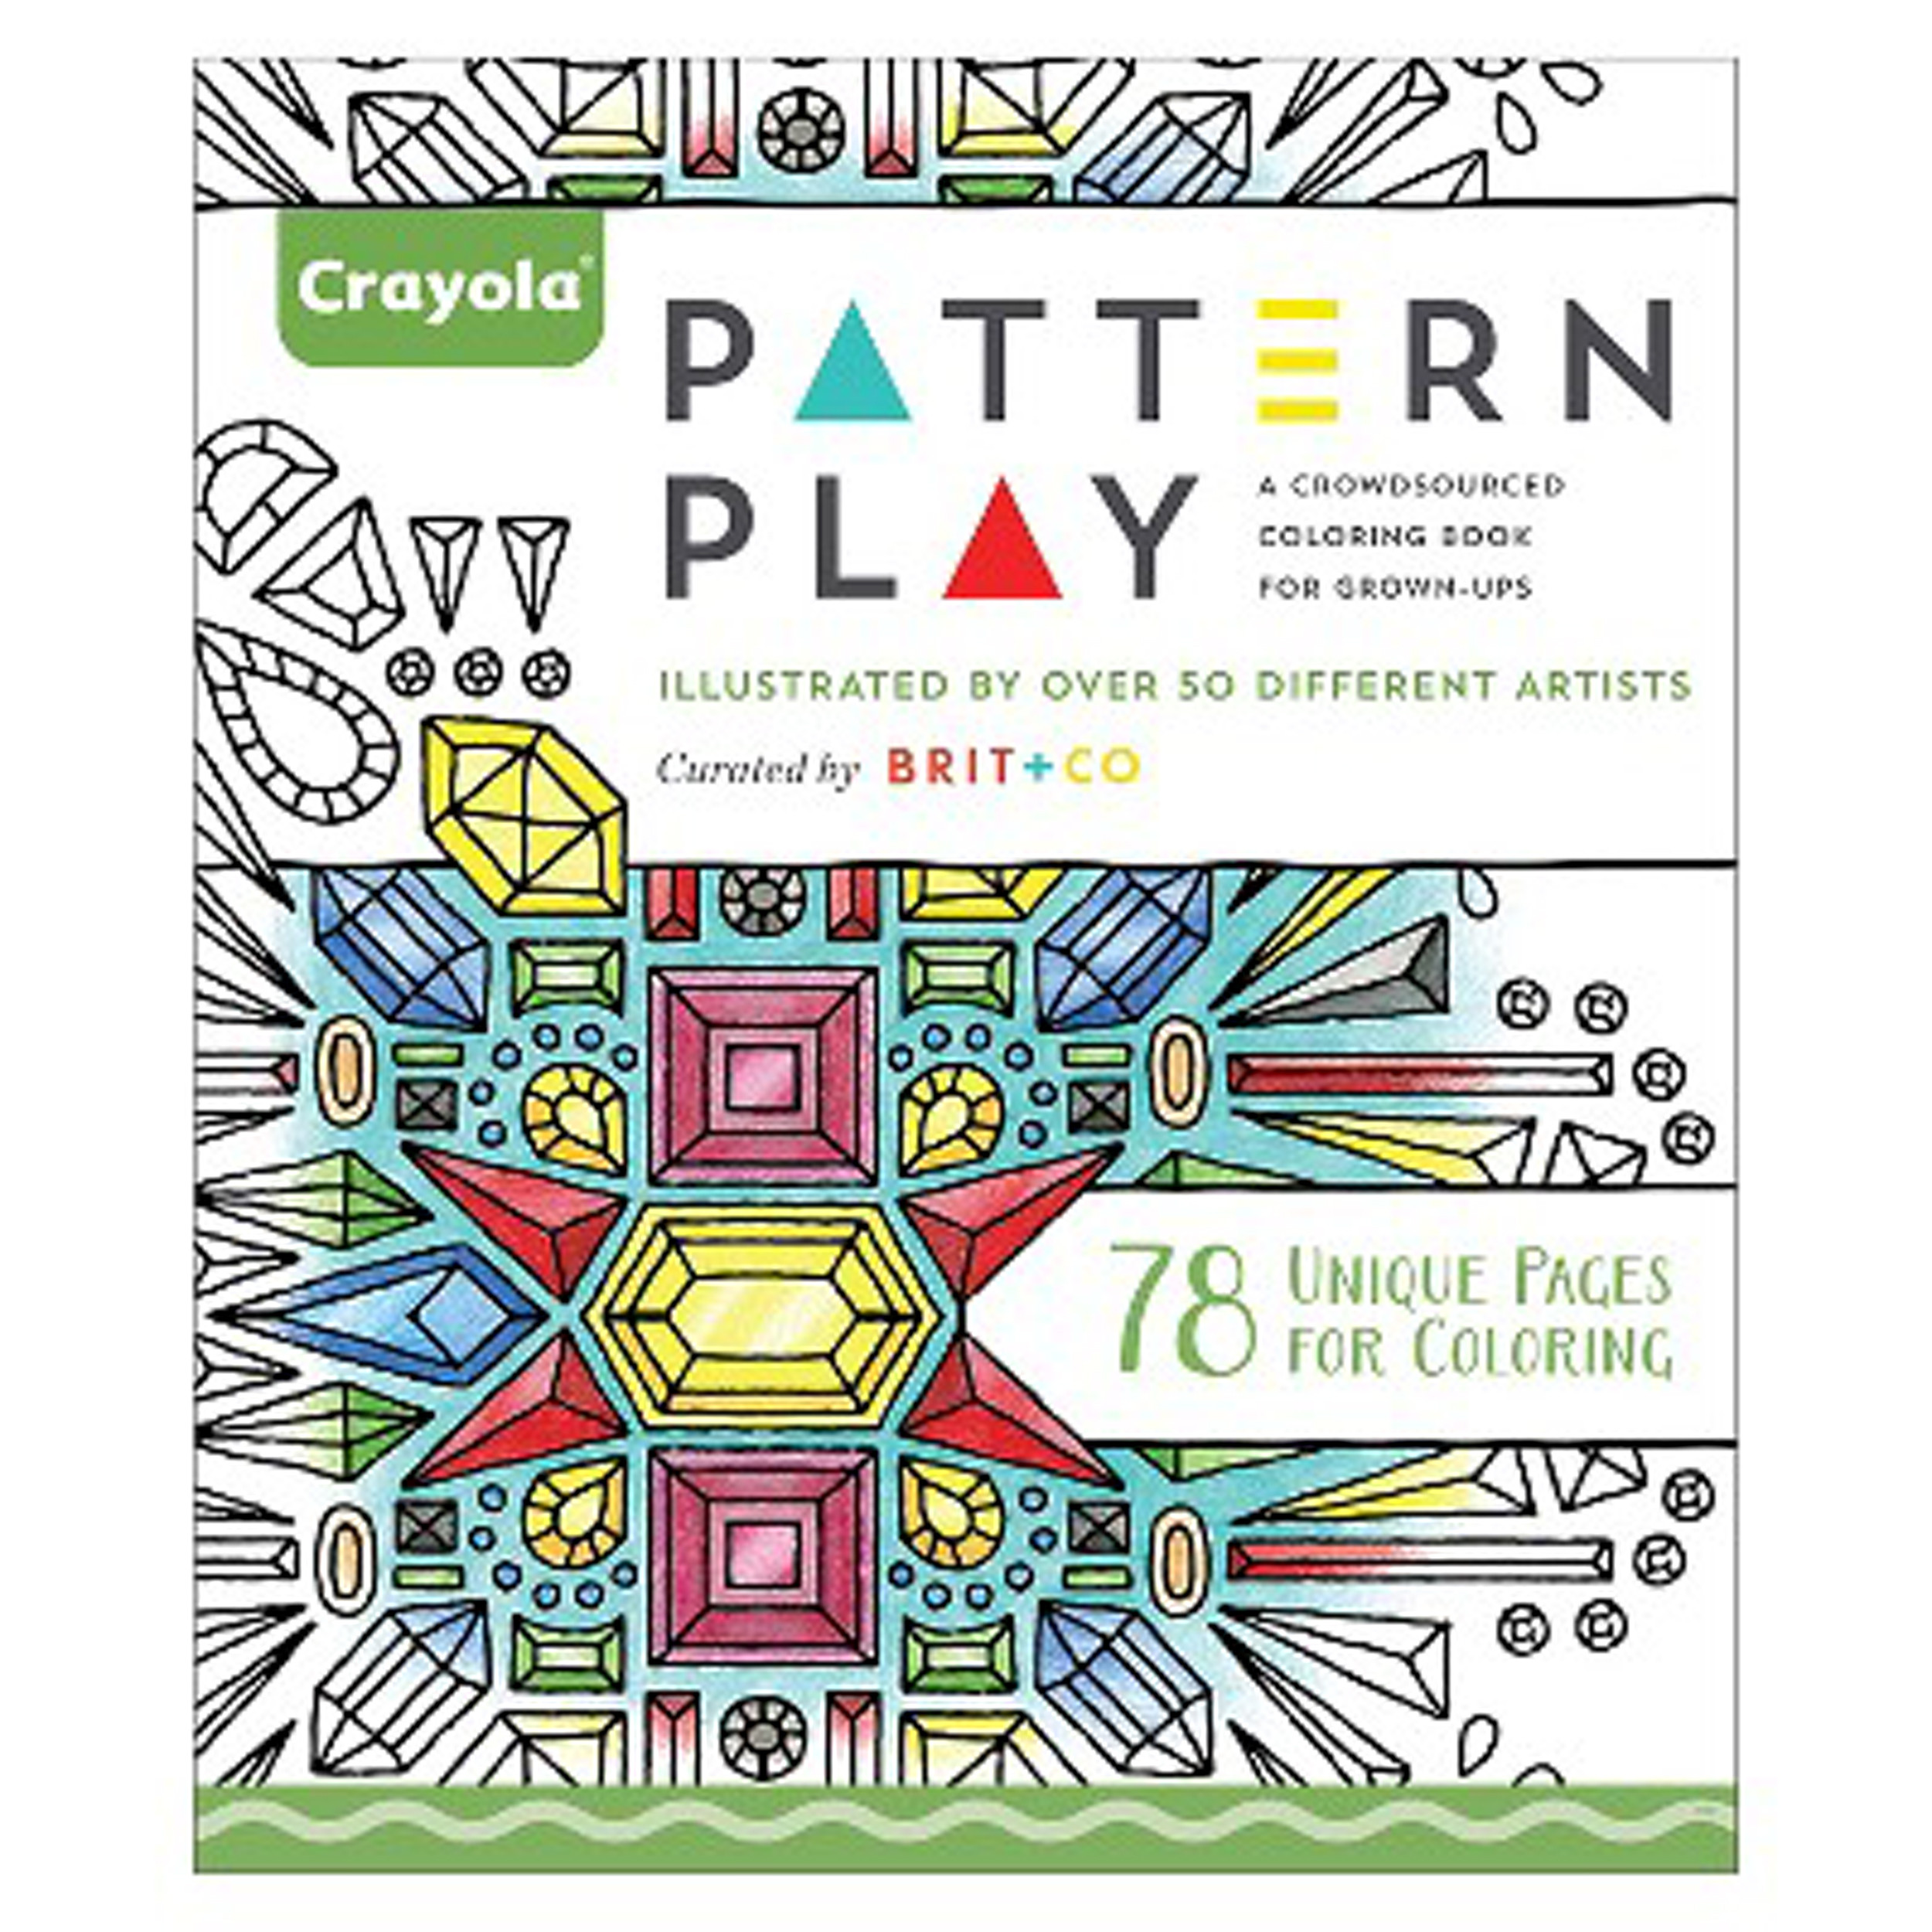 Download Top 23 Target Coloring Books for Adults - Home, Family ...